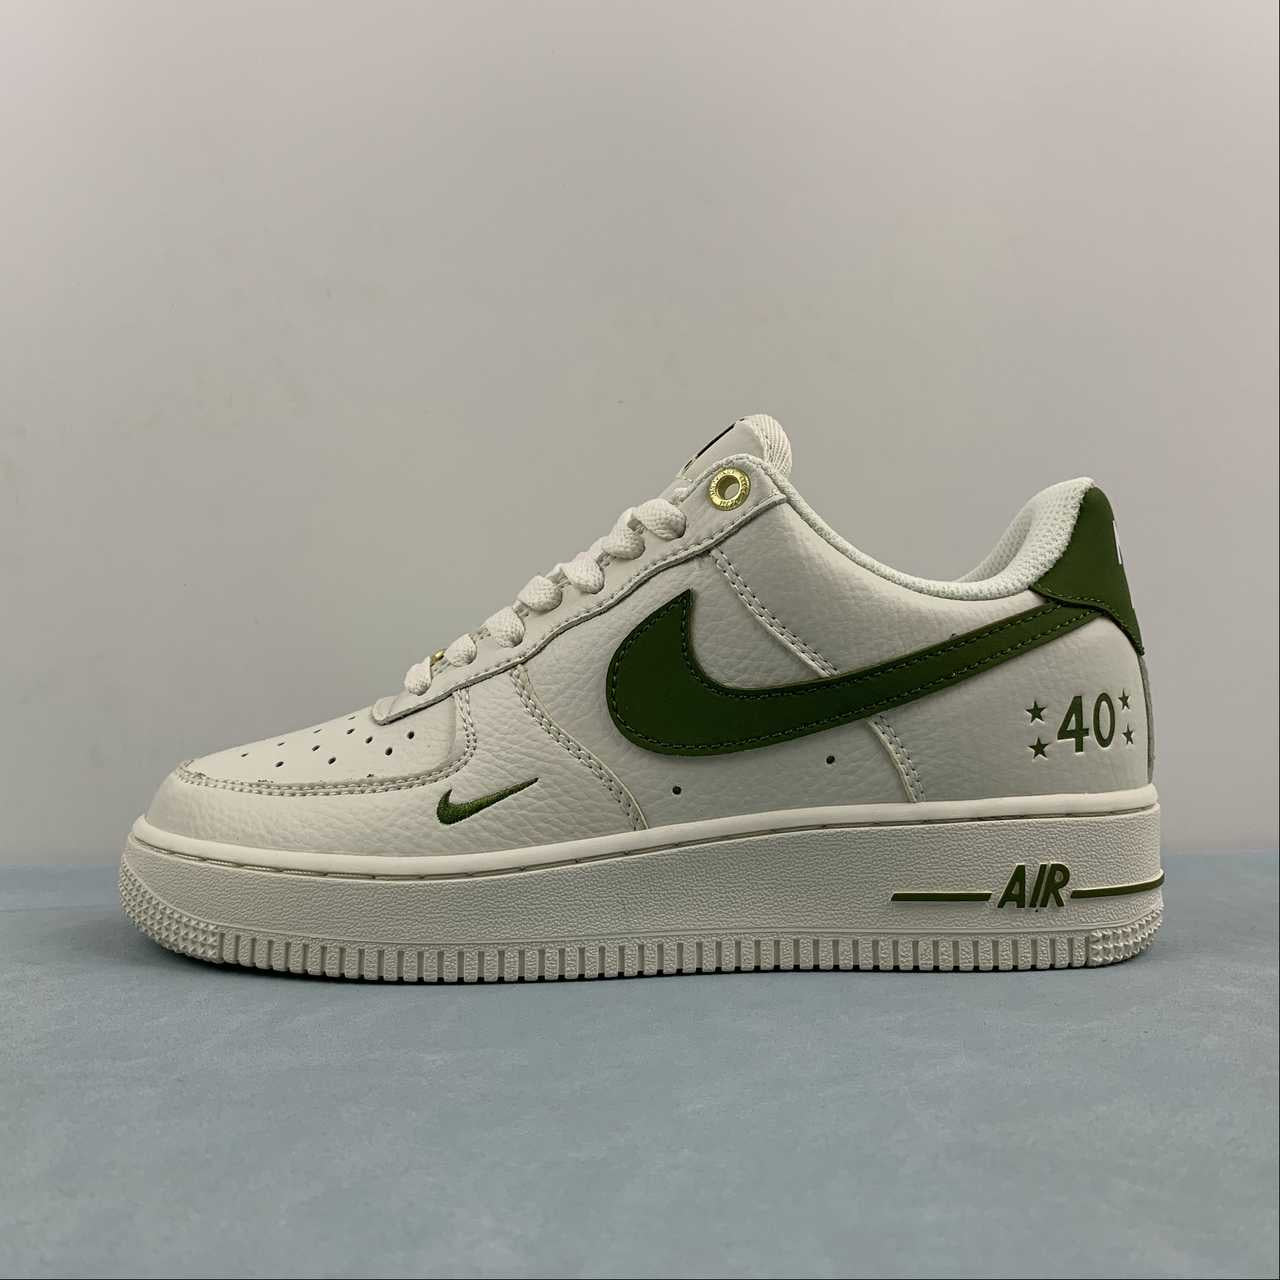 Nike airforce A1 green creme shoes